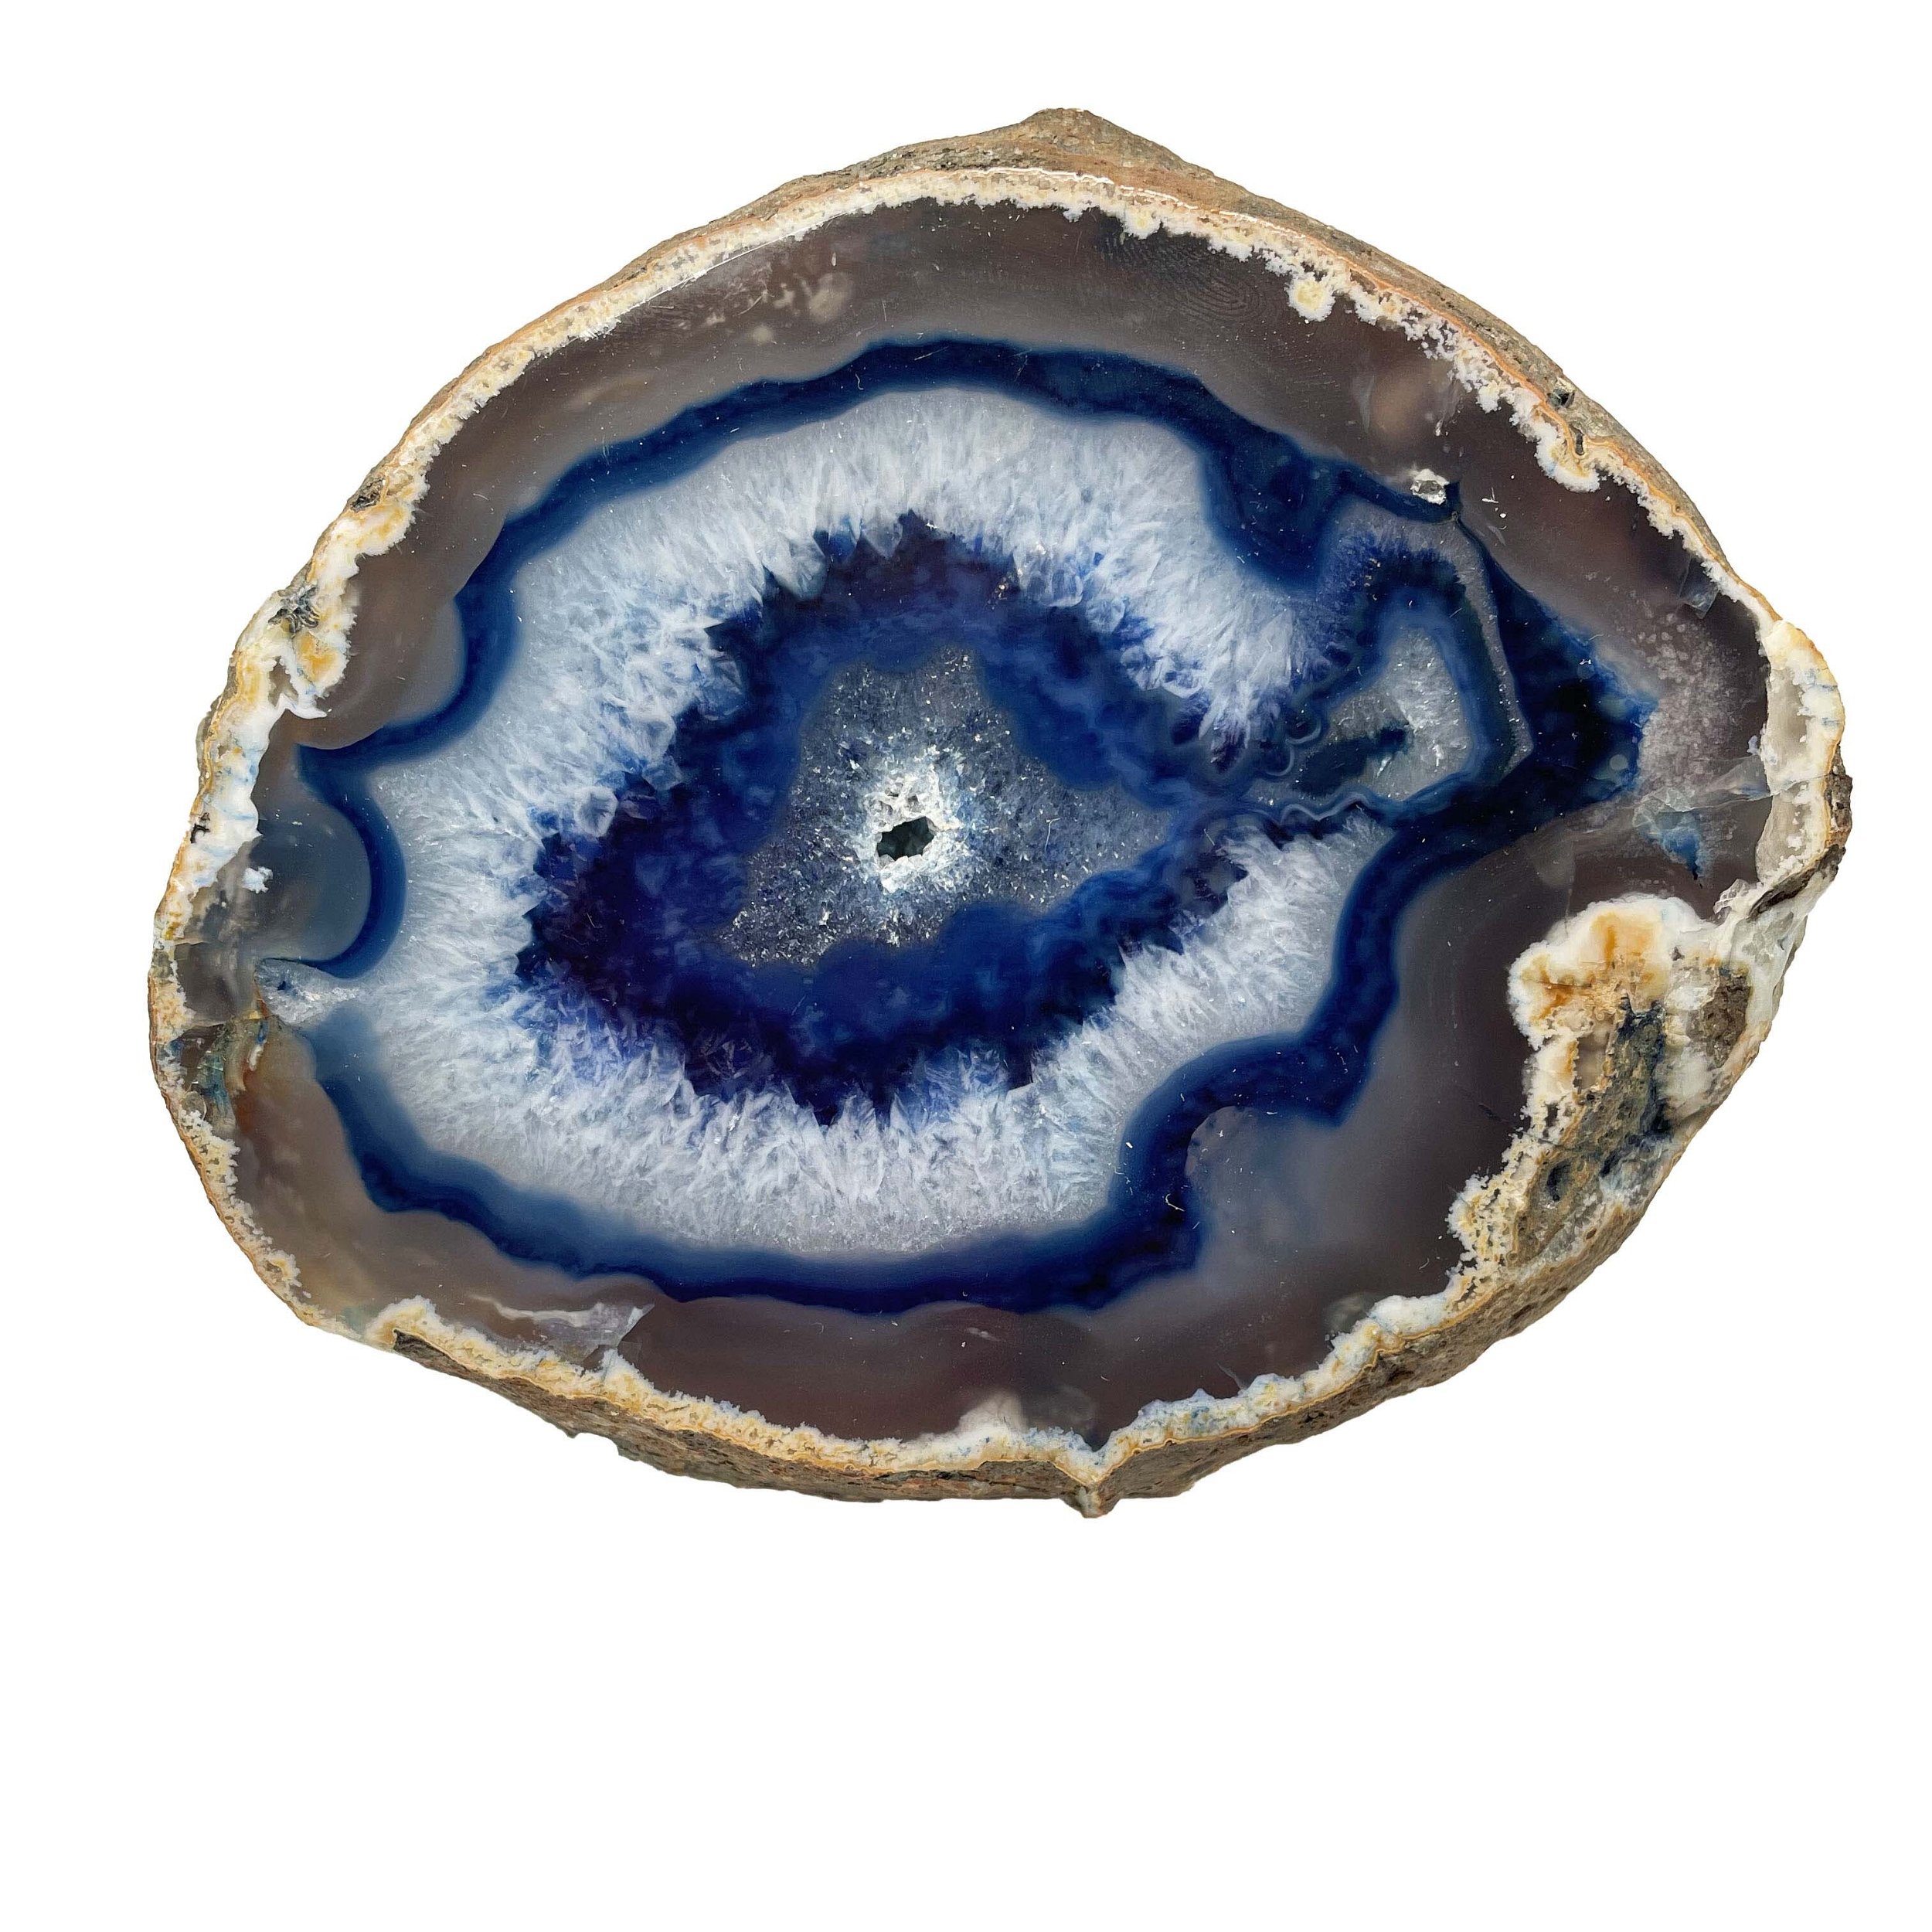 Blue Dyed Agate Slice